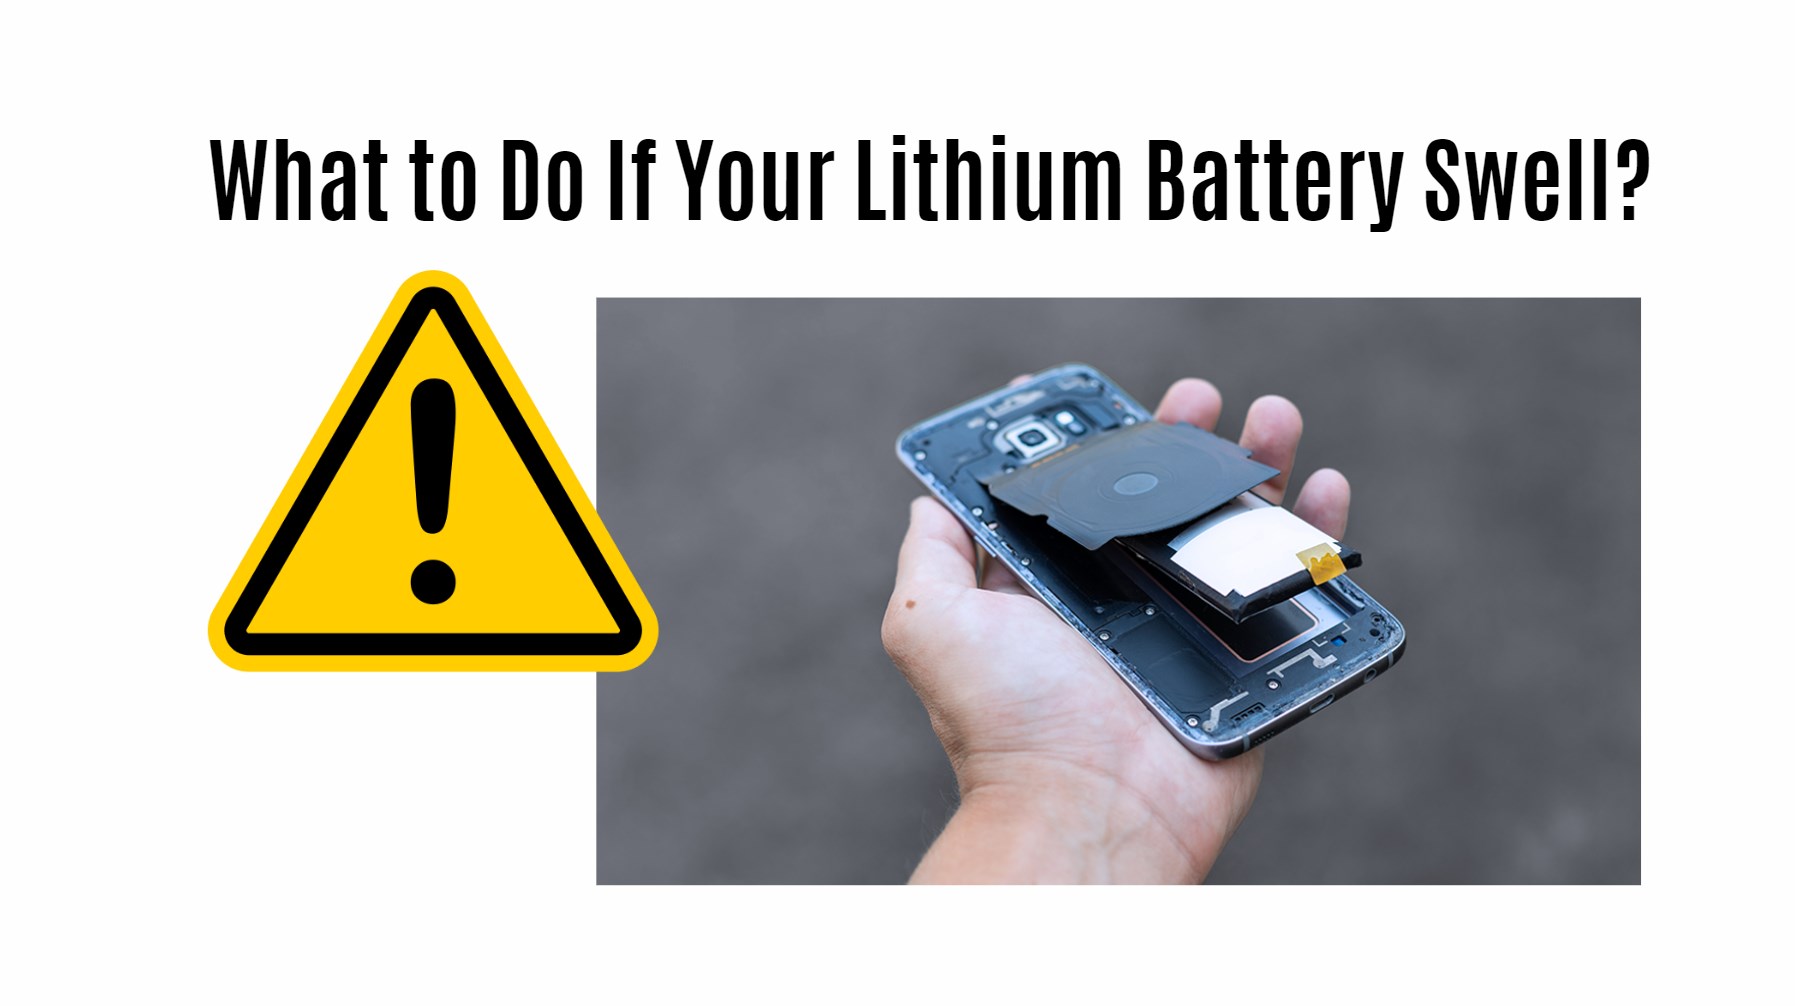 What to Do If Your Lithium Battery Swell?